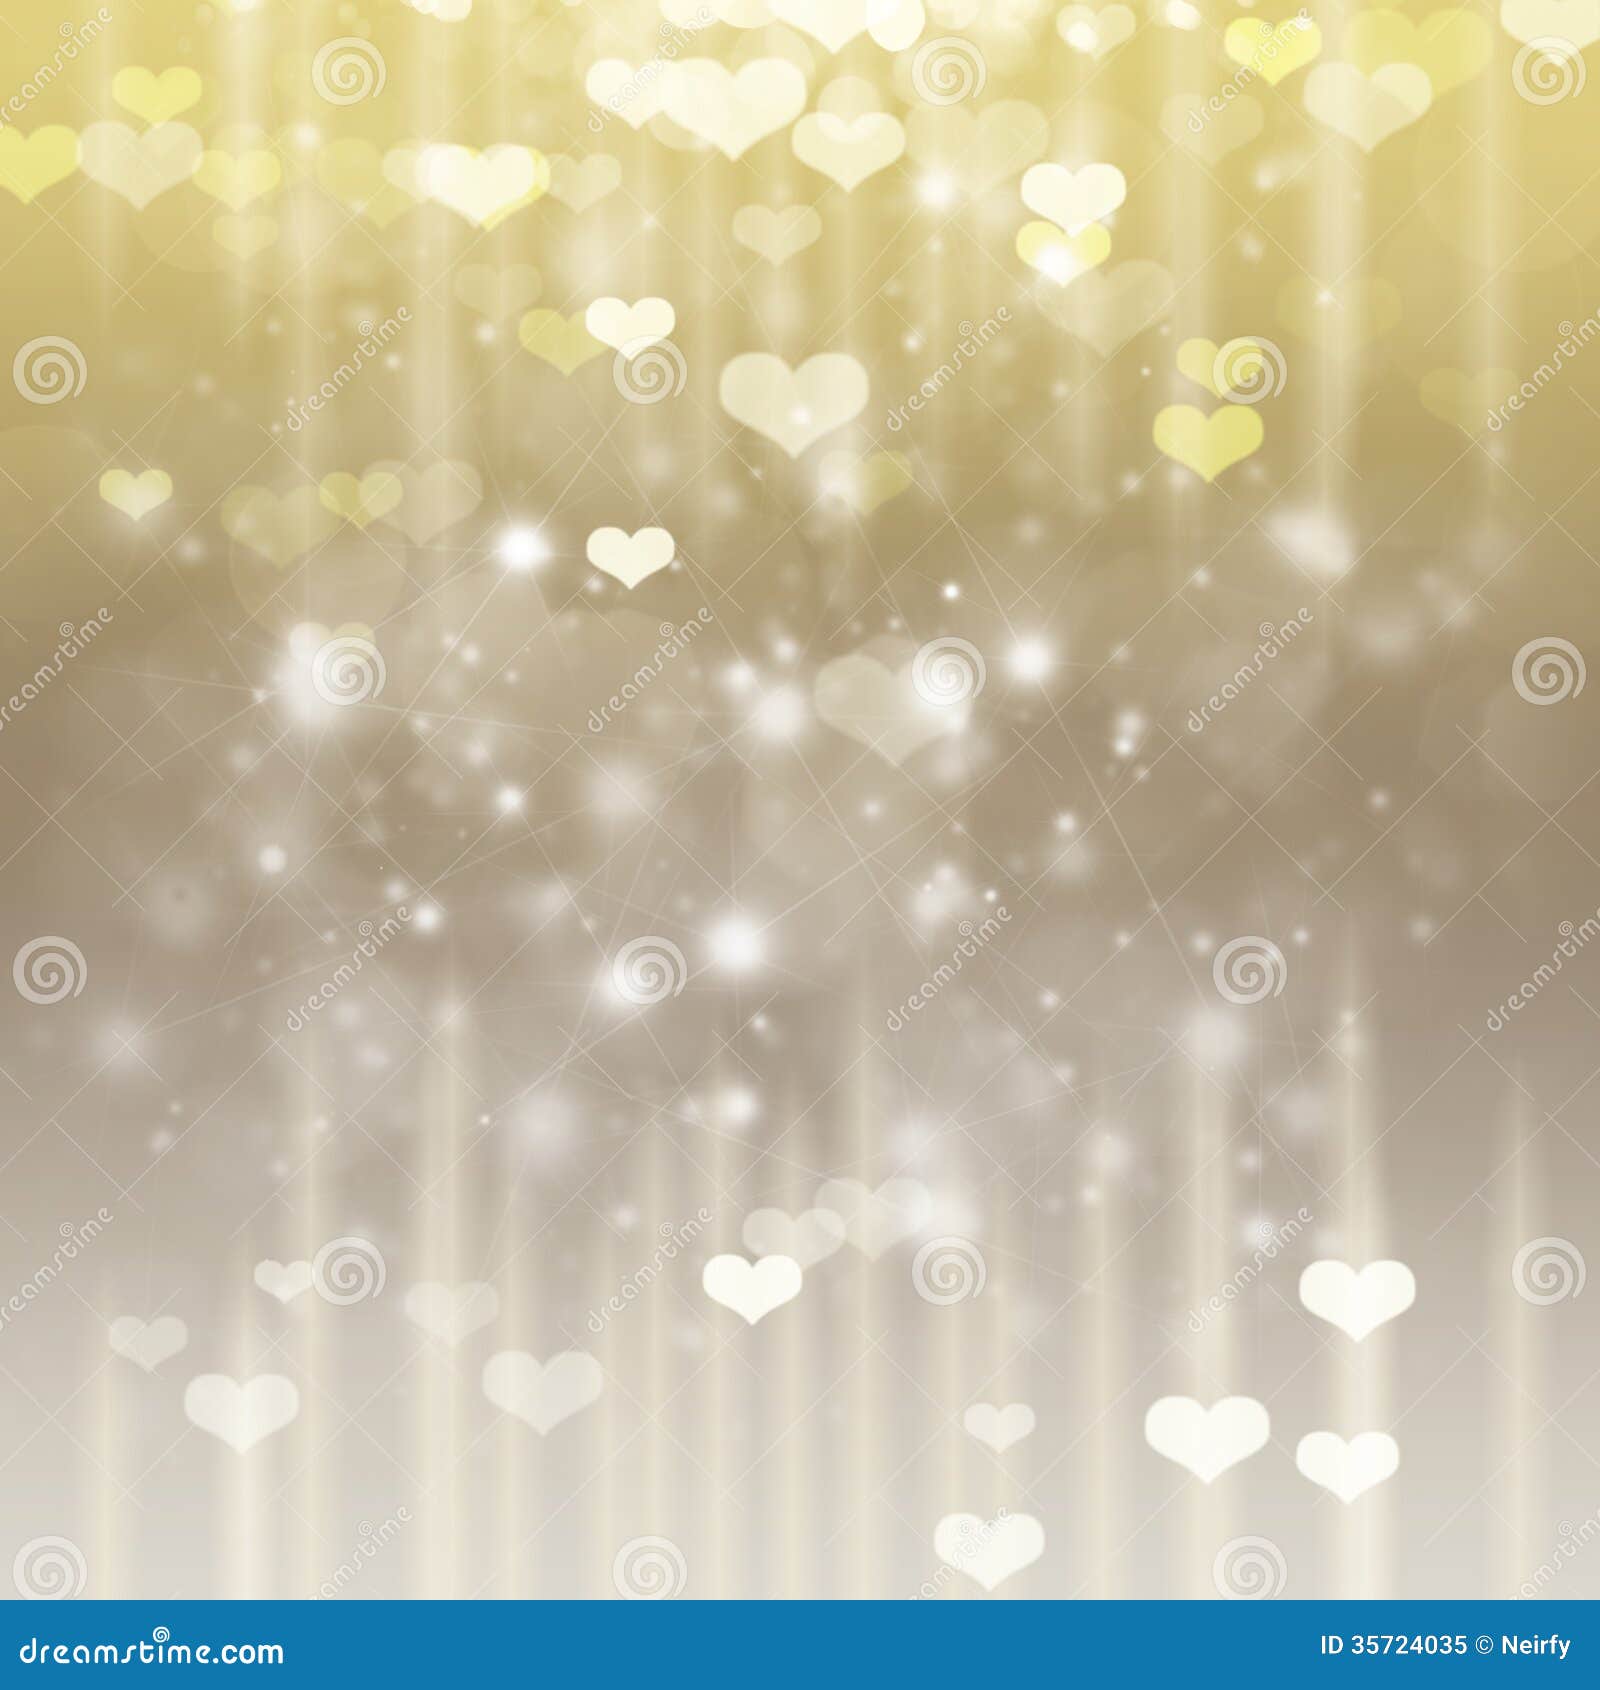 Valentines Day Siver Anf Gold Background Royalty Free Stock Photo - Image: 357240351300 x 1390